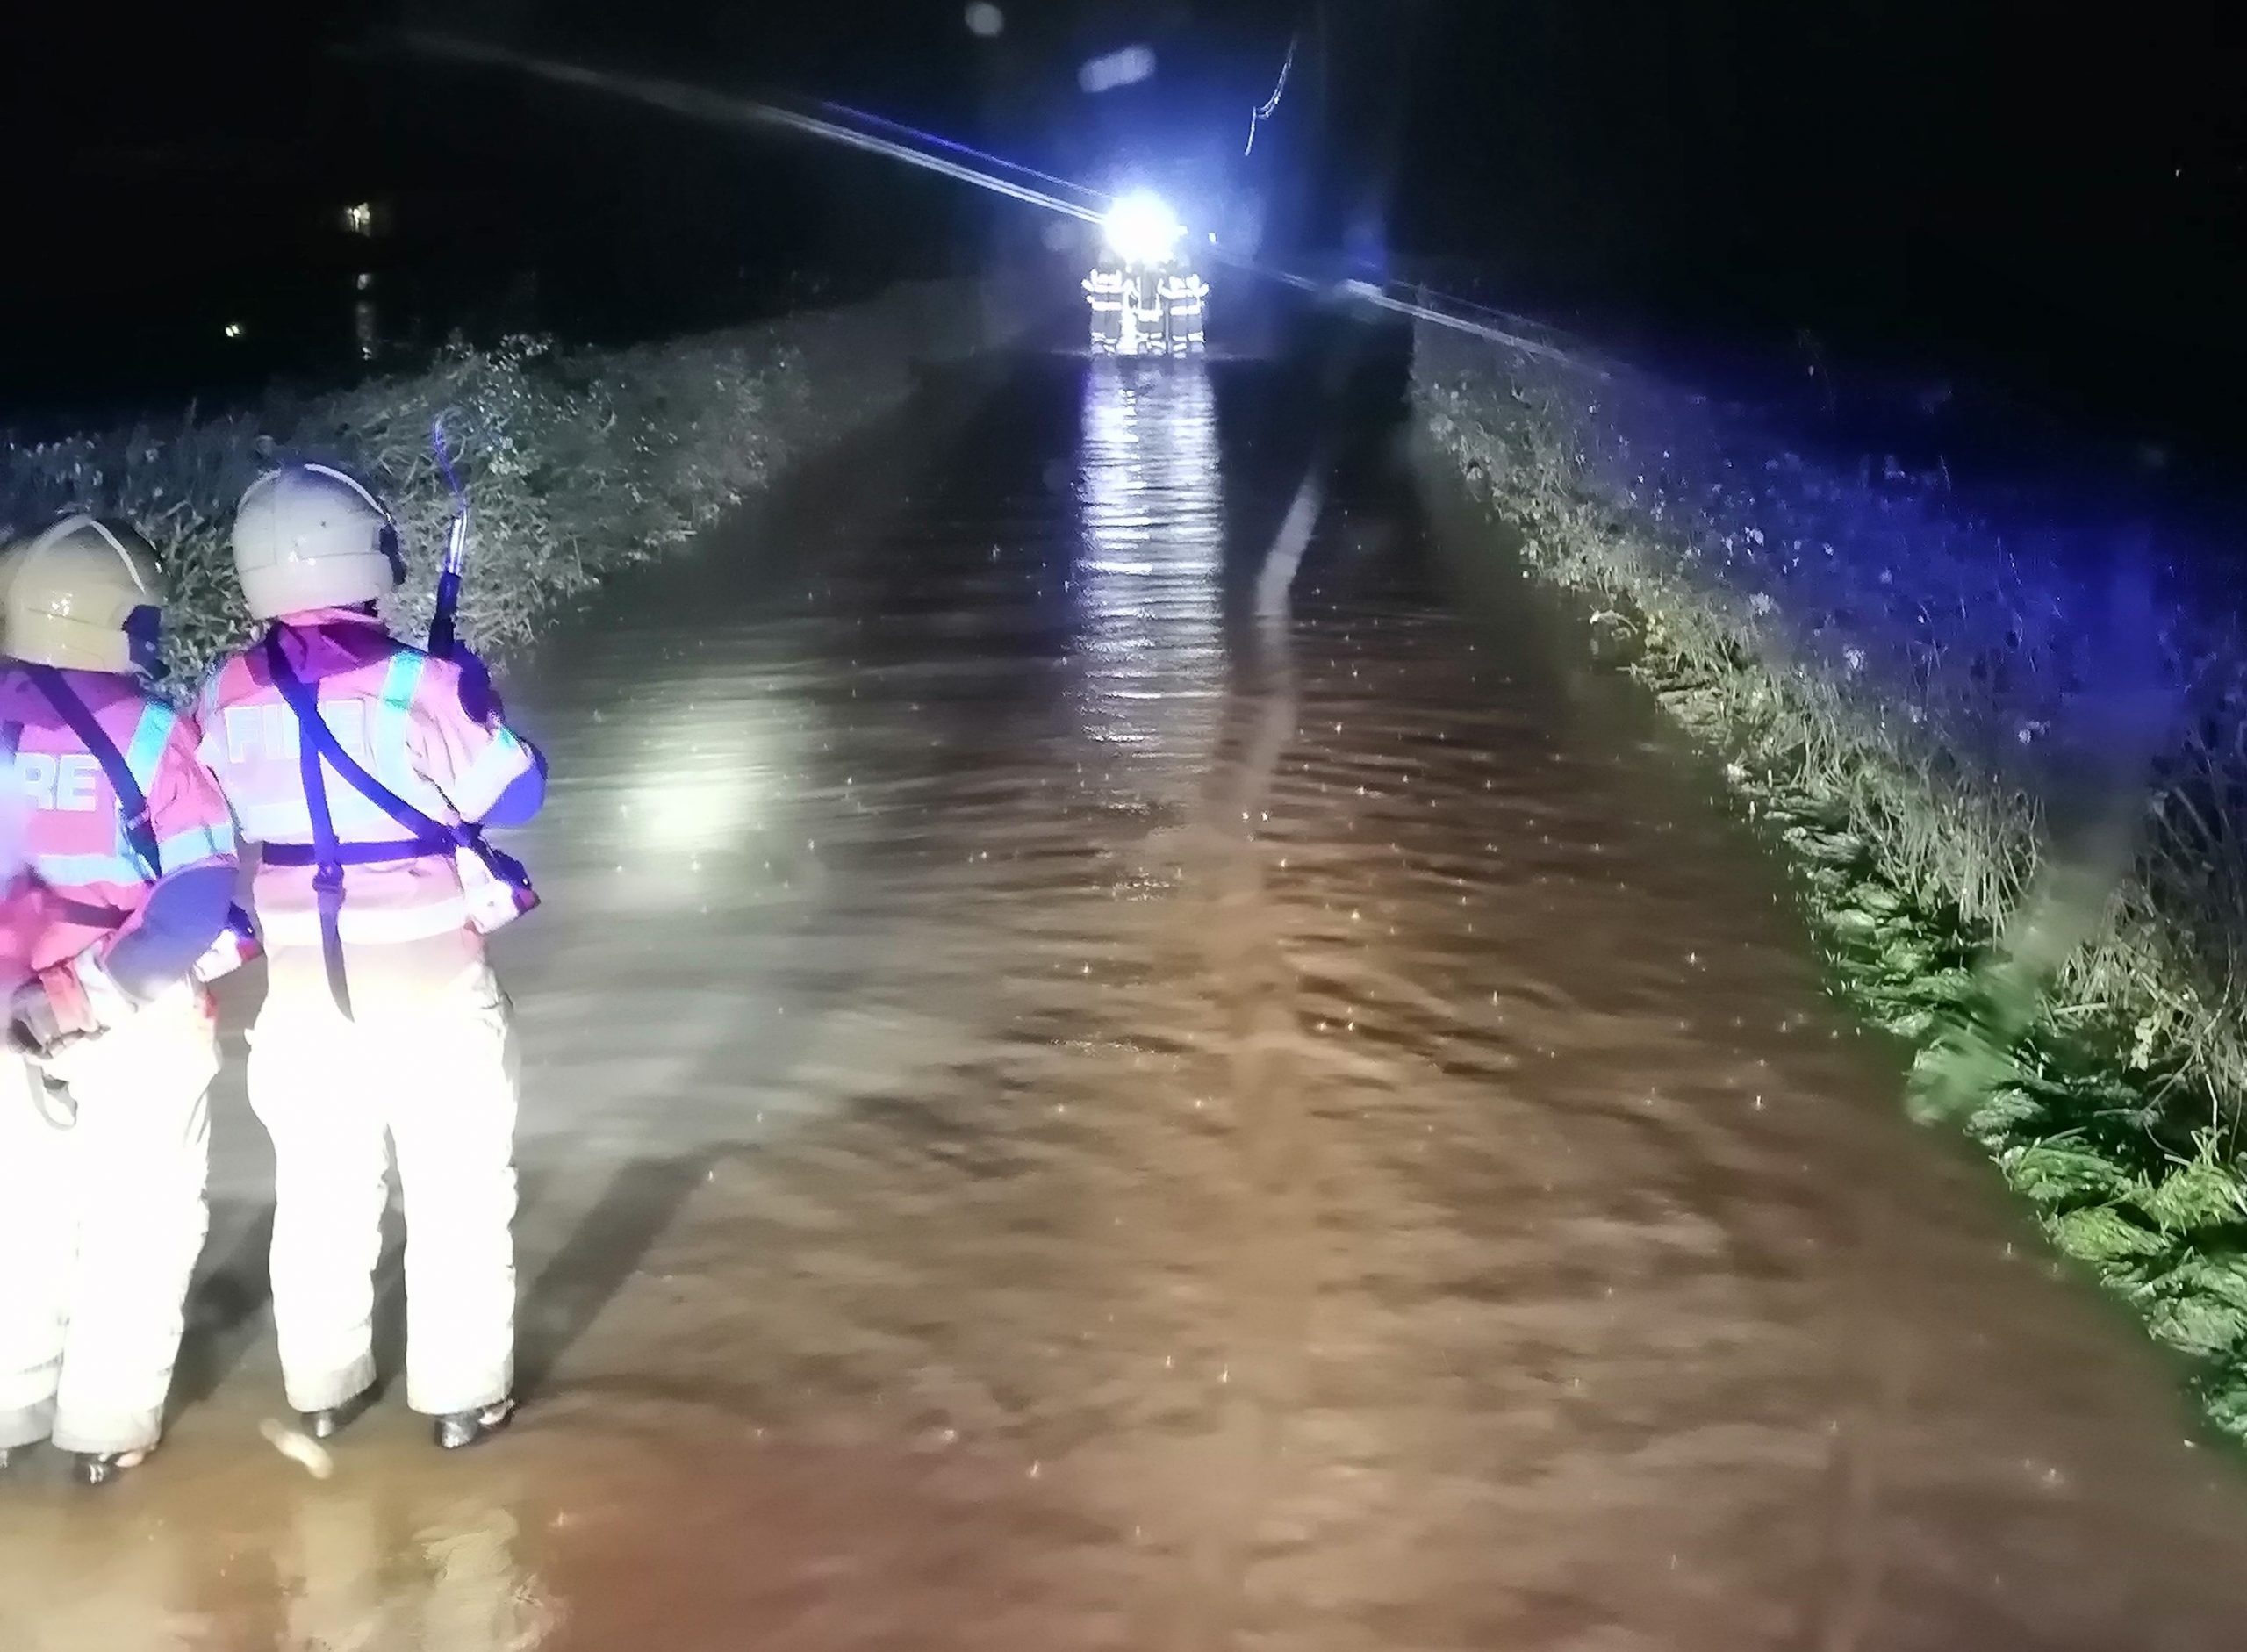 NEWS | Fire crews rescue 44 people from vehicles stuck in floodwater in Herefordshire and Worcestershire